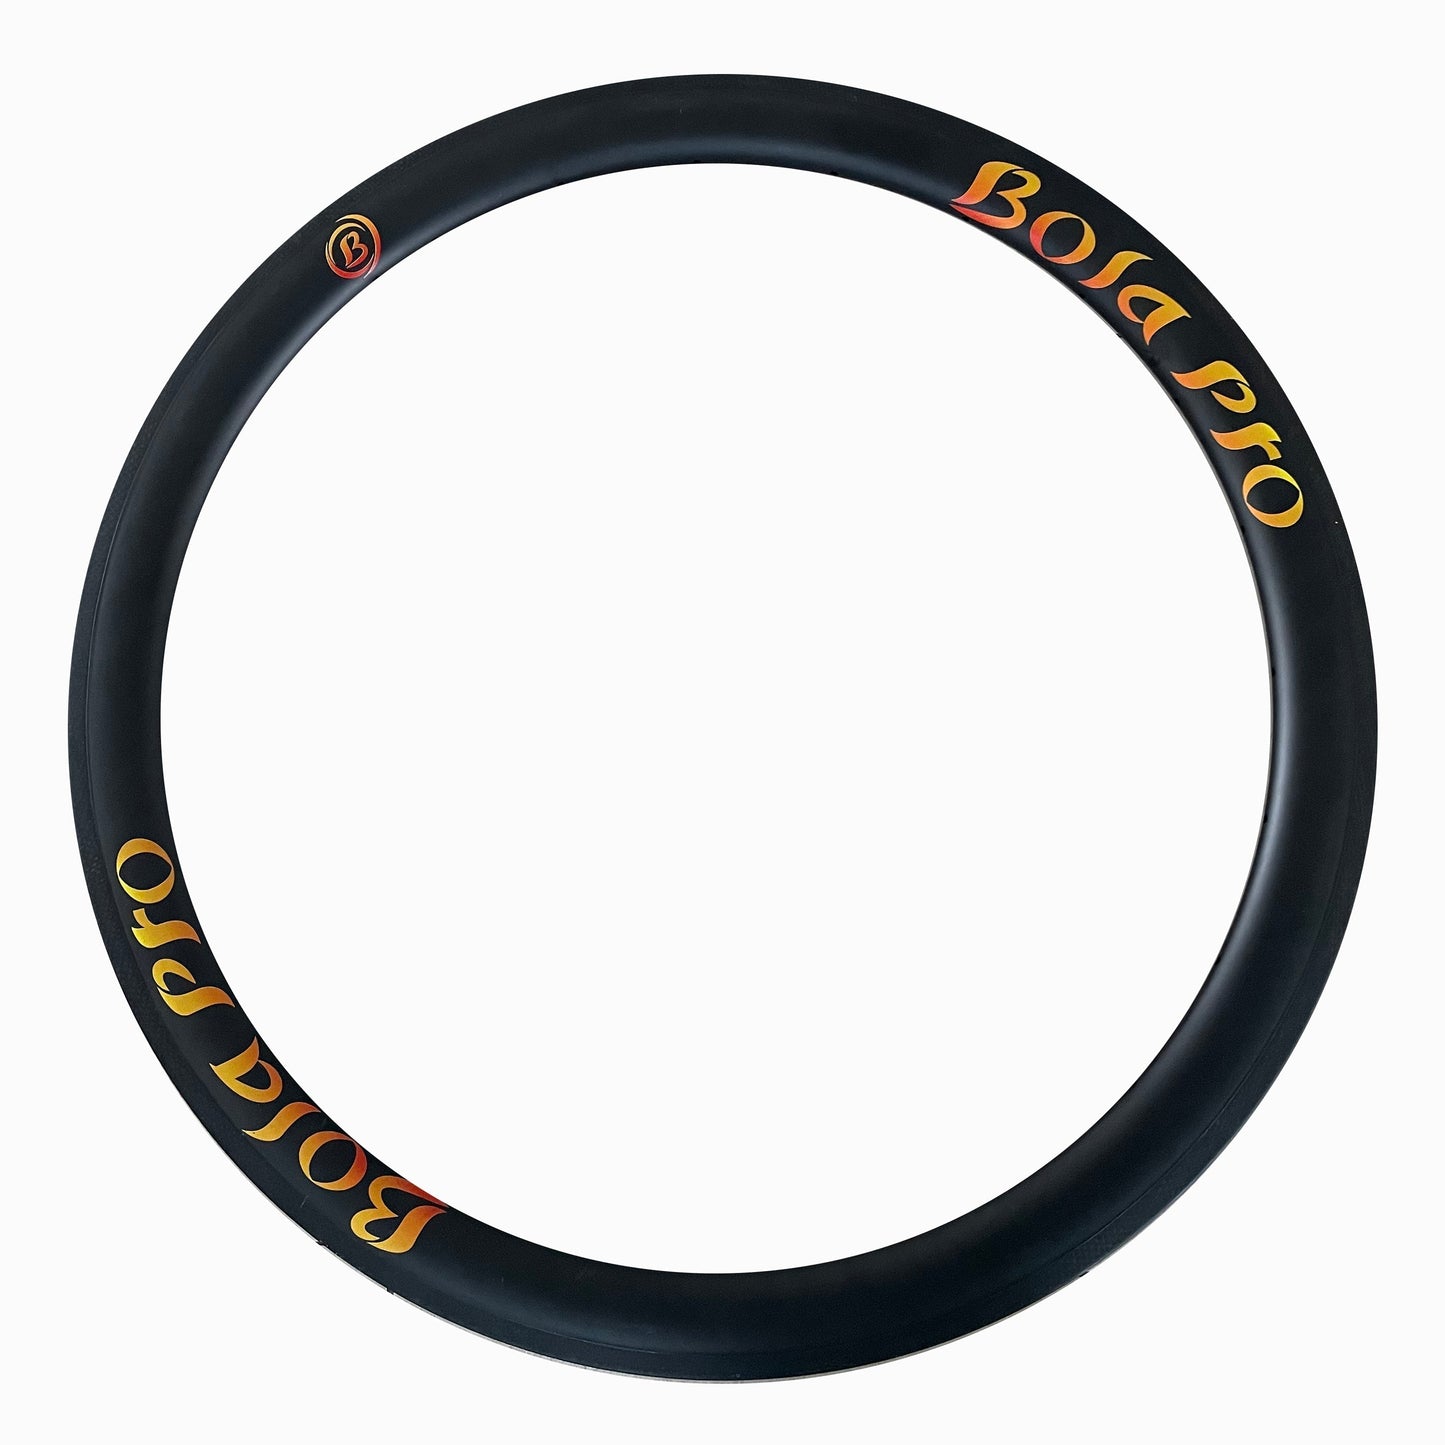 700c route carbon rims tubular 55mm high  28mm wide  for riding